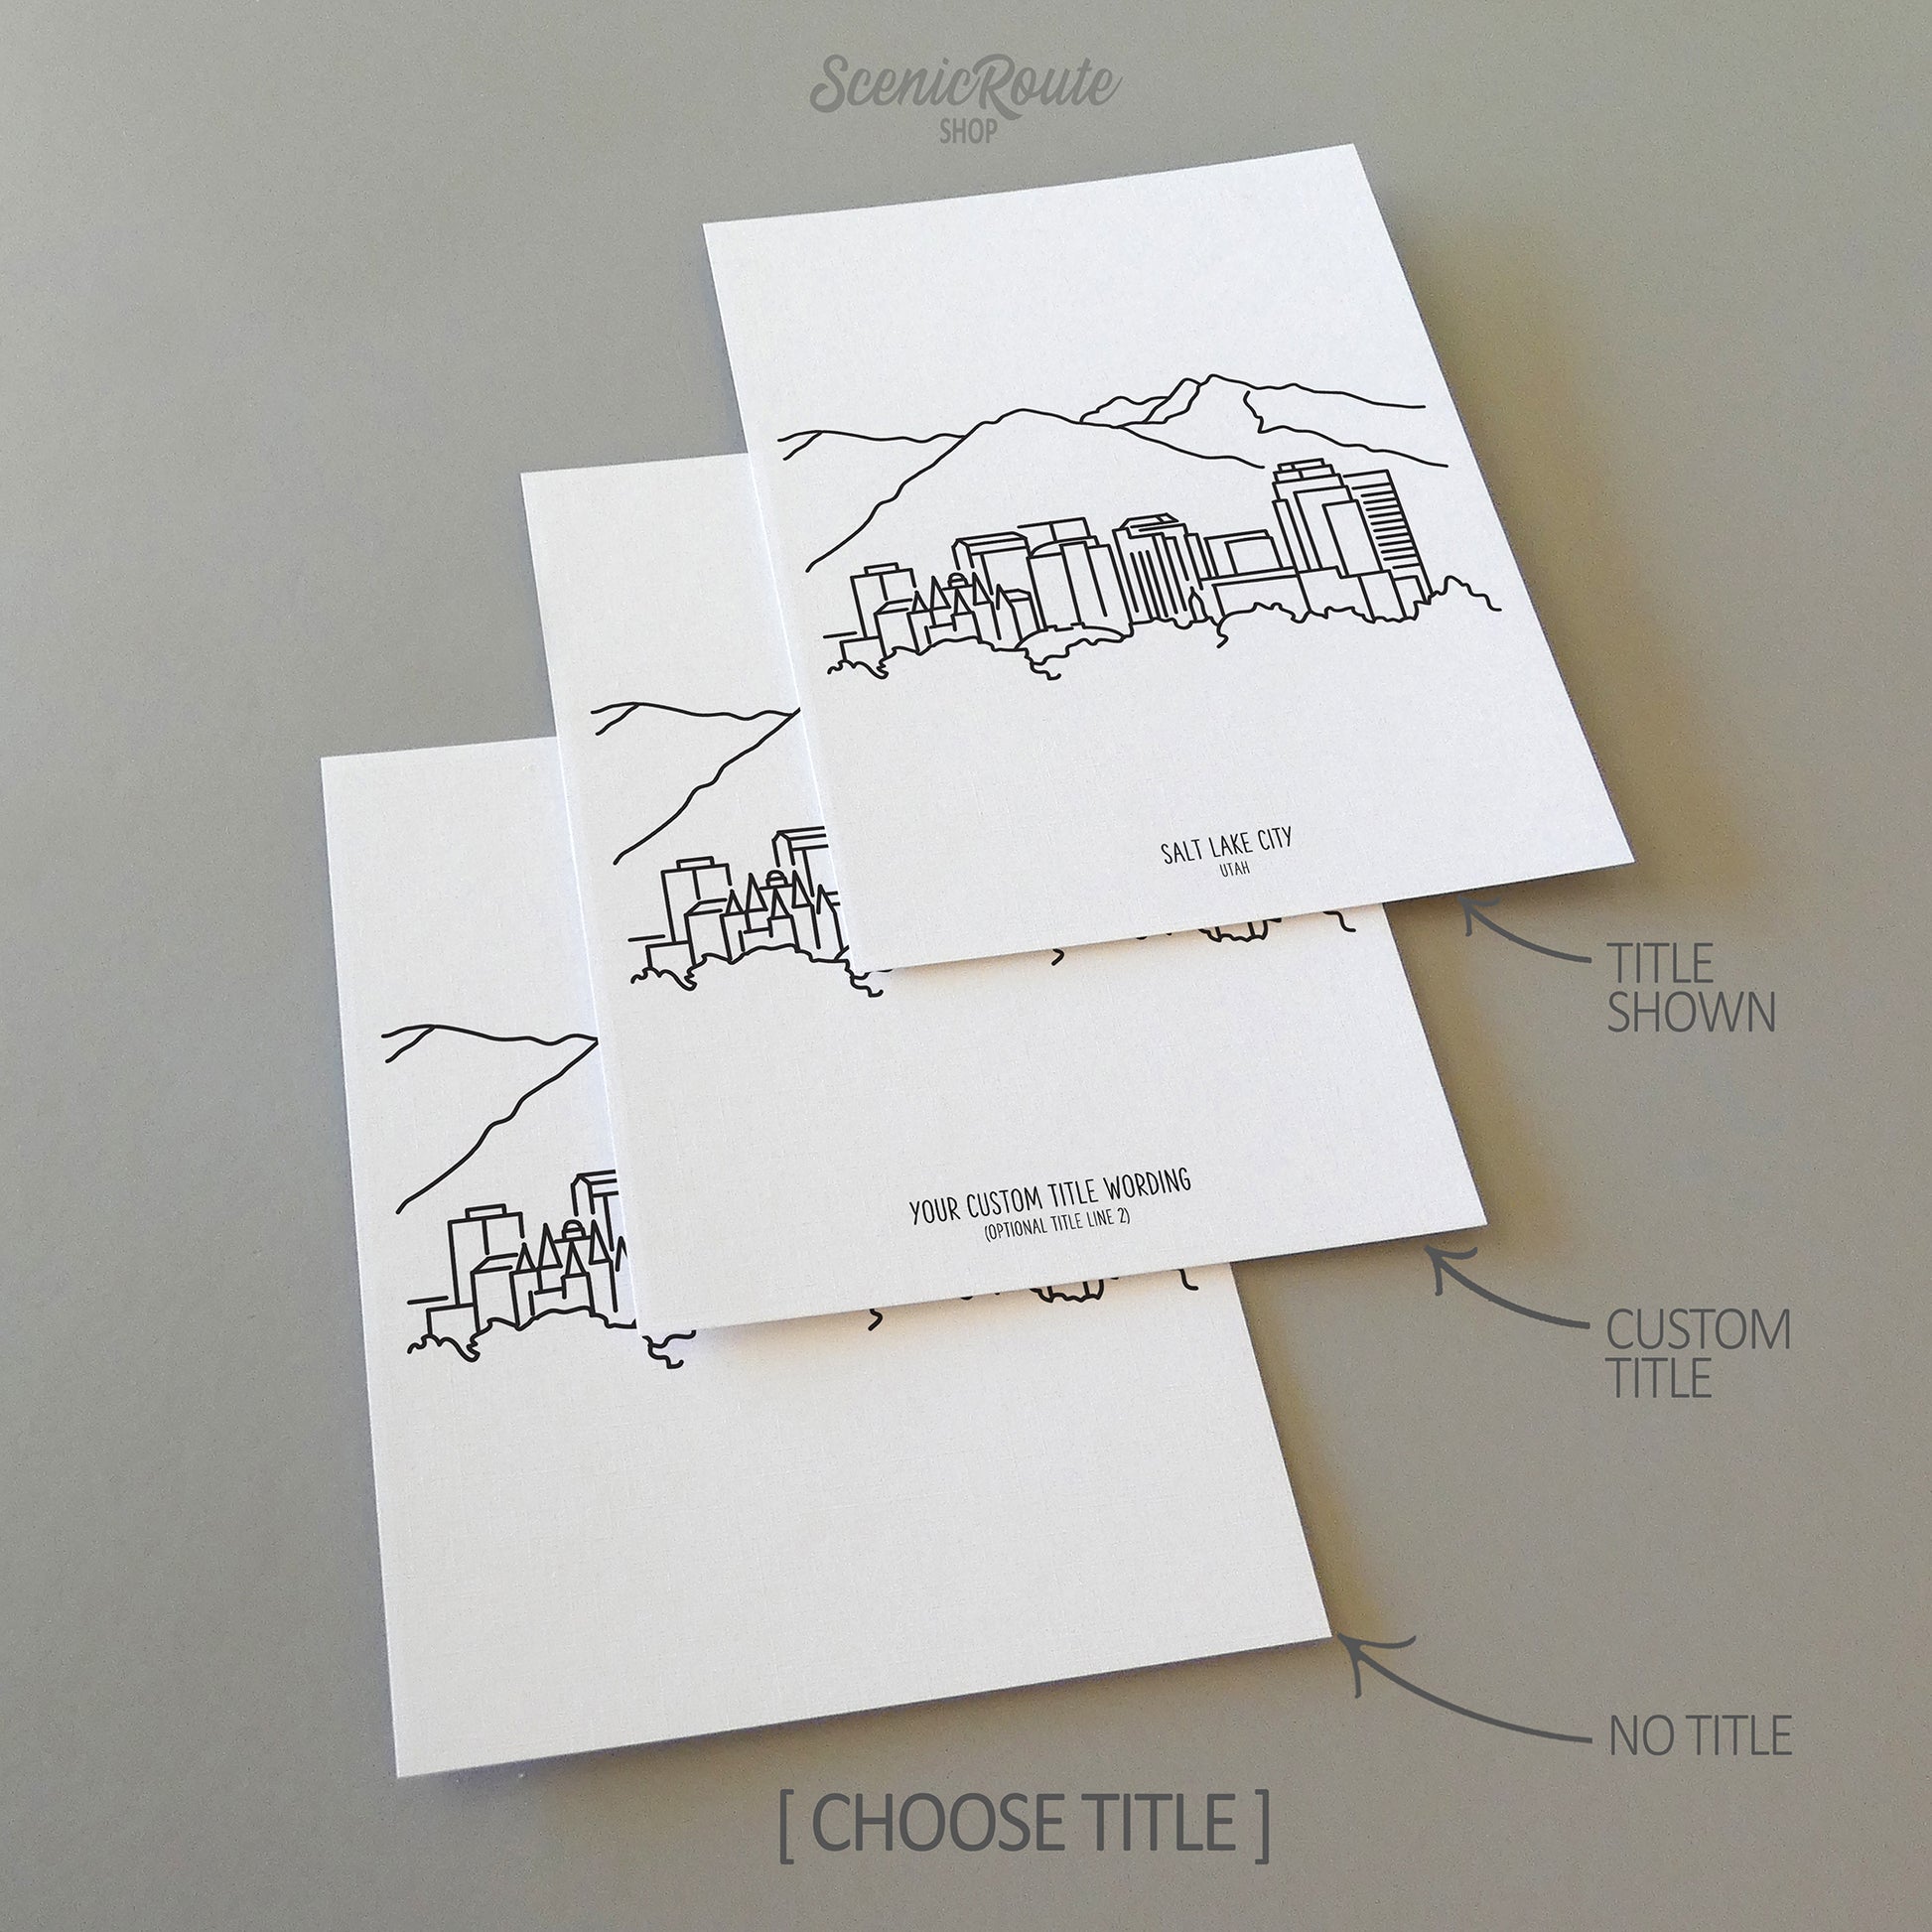 Three line art drawings of the Salt Lake City Skyline on white linen paper with a gray background. The pieces are shown with title options that can be chosen and personalized.